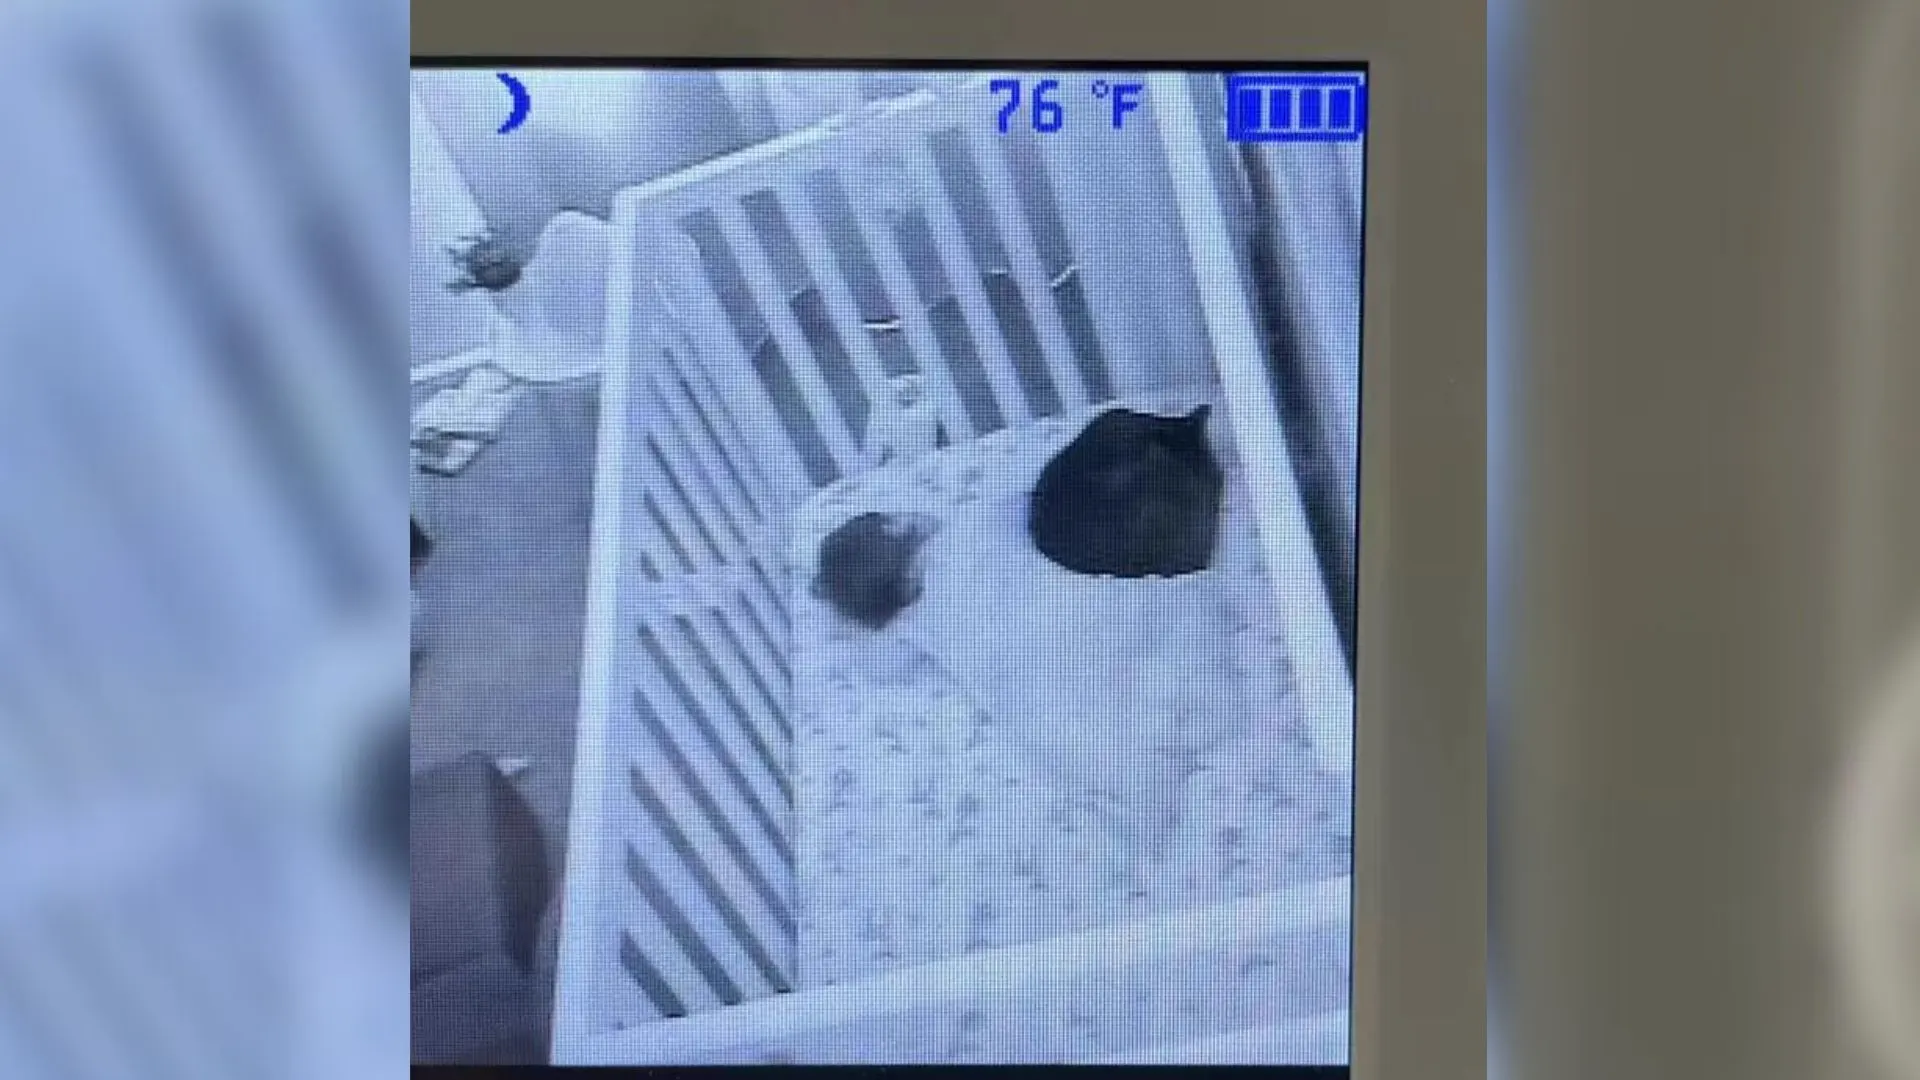 Mom Shocked When She Sees A Strange Object In Her Baby’s Crib On Monitor